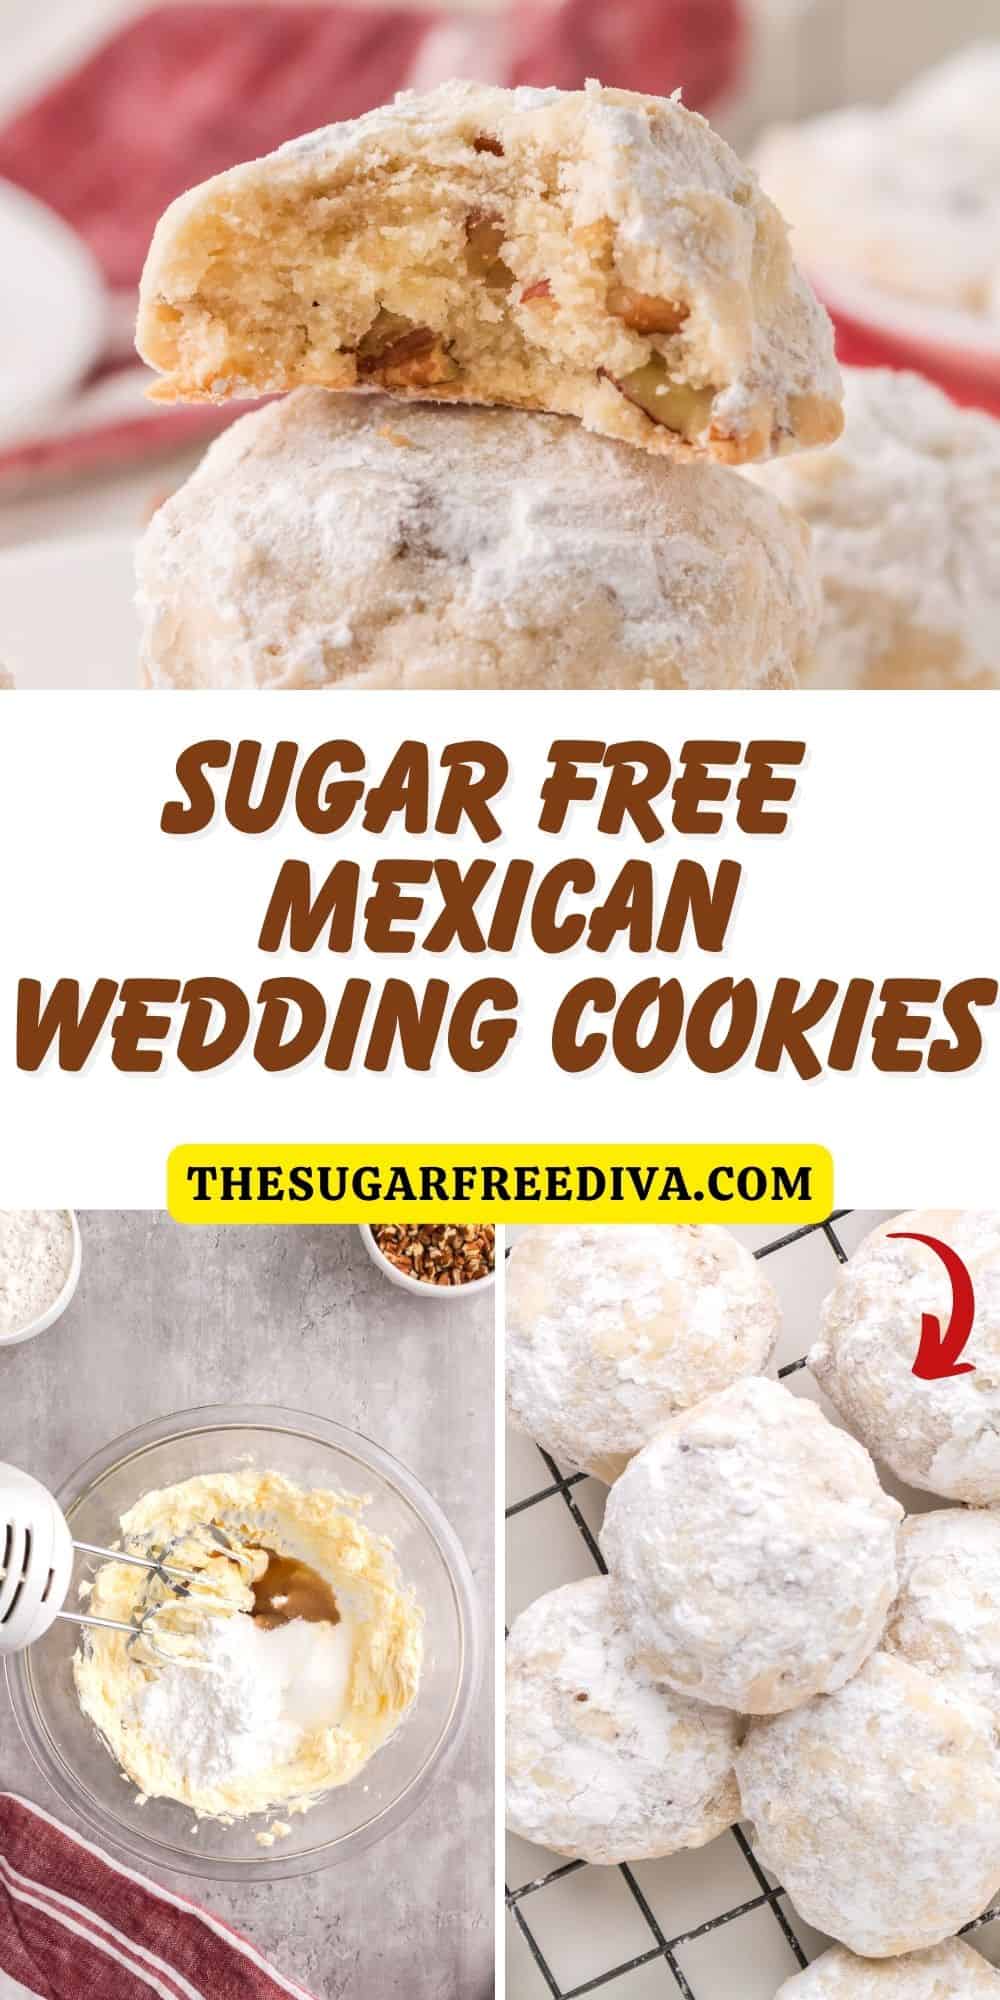 Sugar Free Mexican Wedding Cookies, a simple and delicious dessert recipe featuring a crunchy buttery cookie coated in powdered sugar.